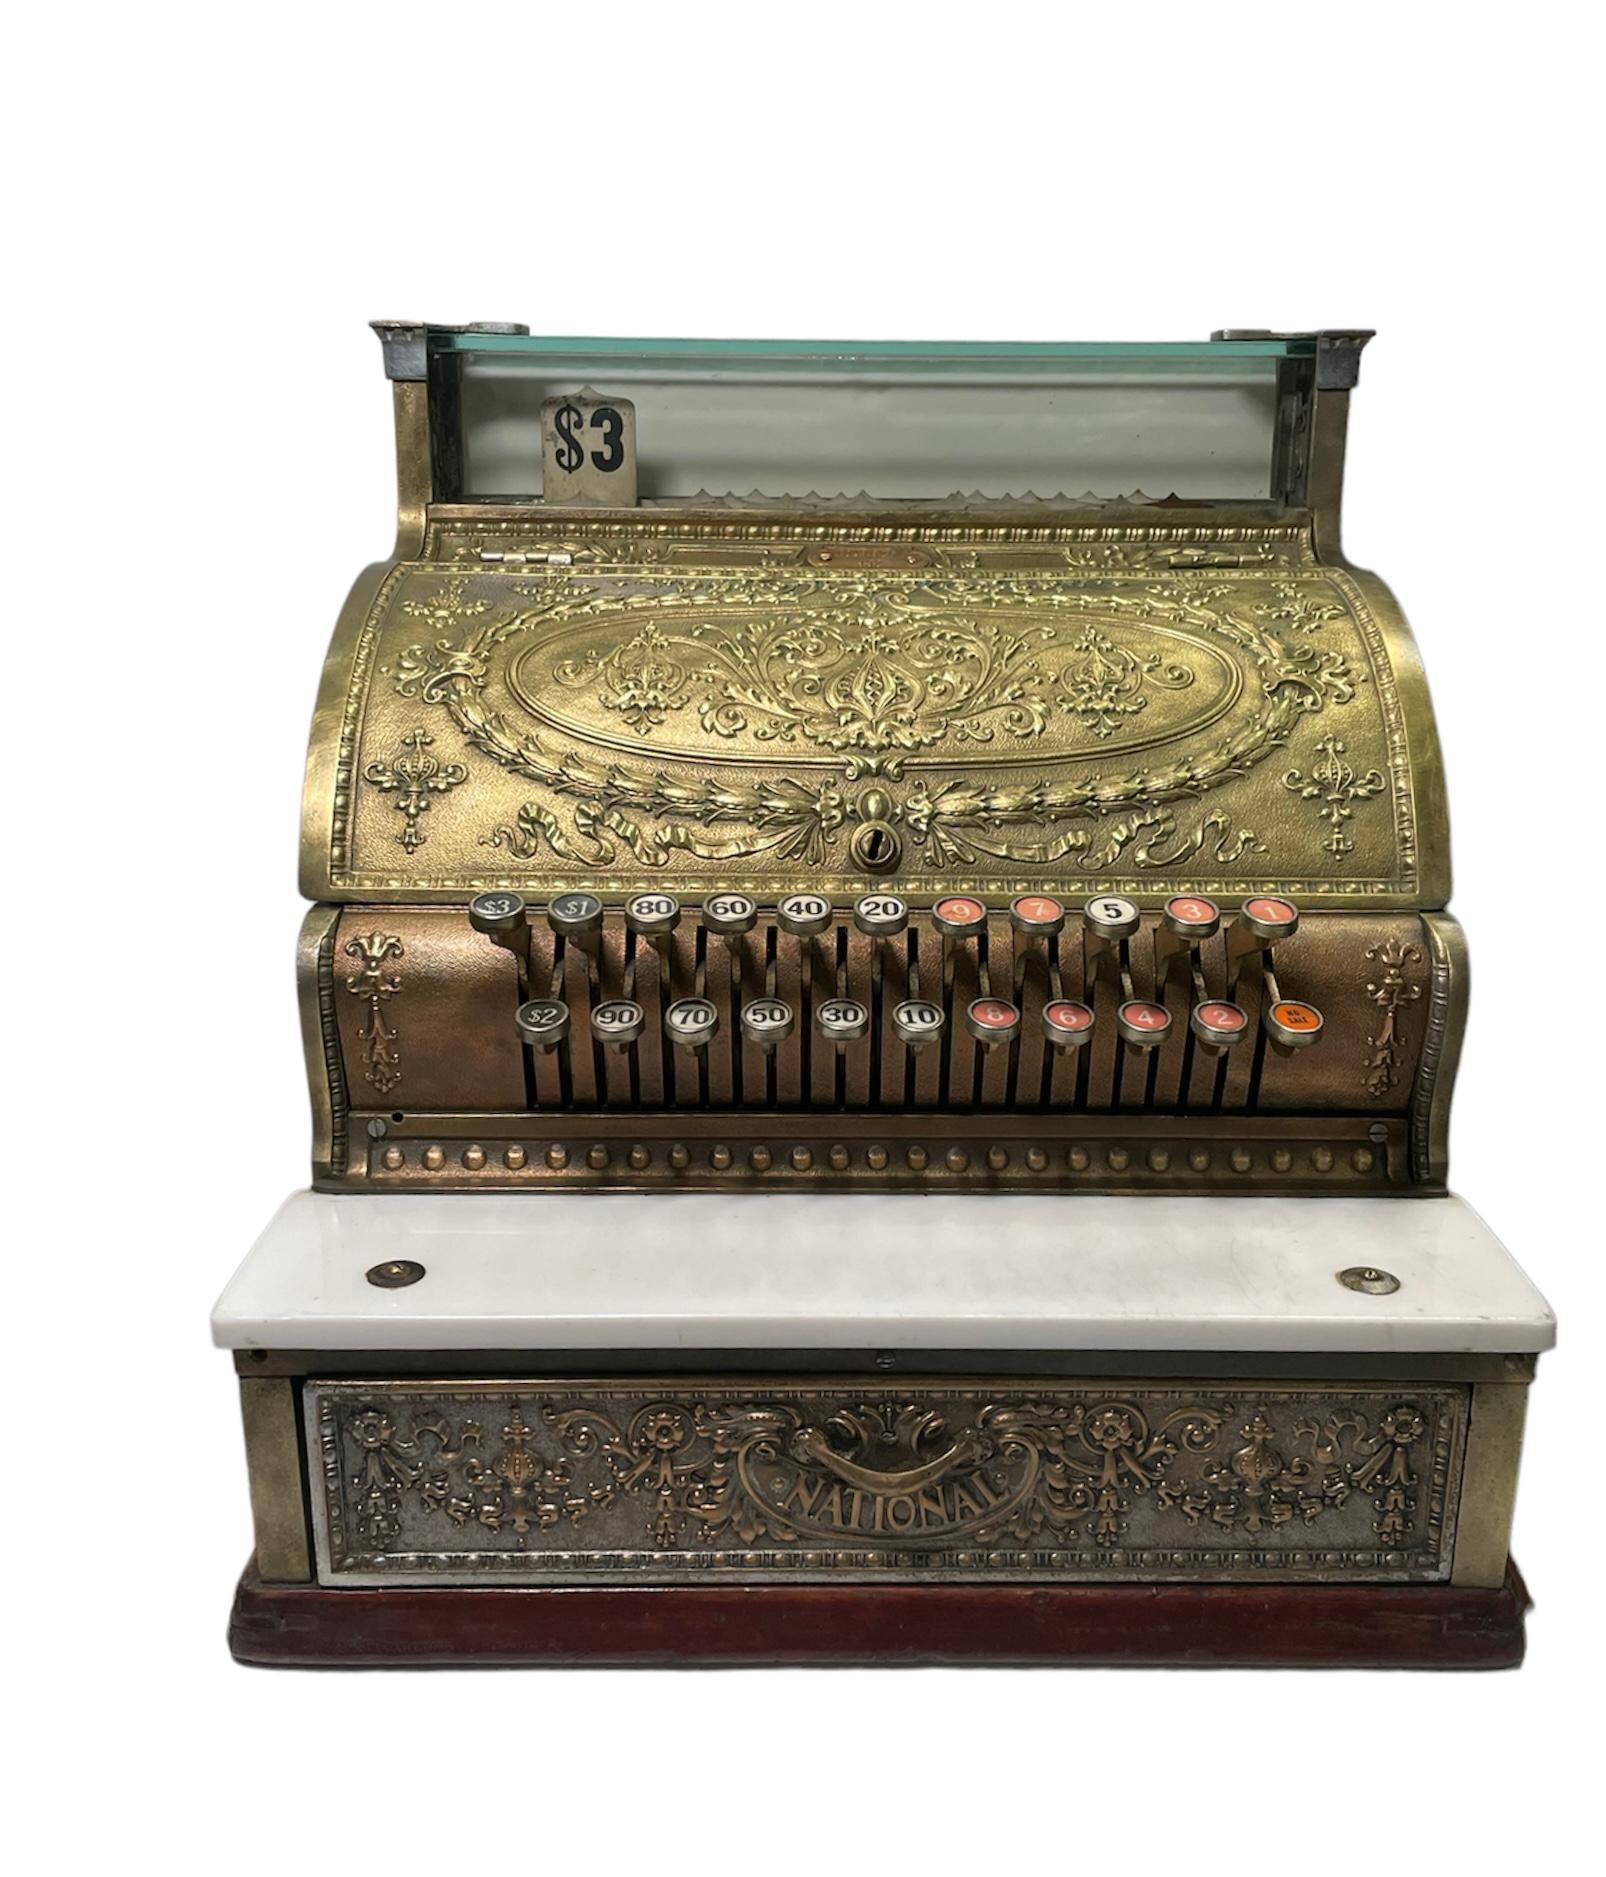 Early 20th Century National Cash Register 7